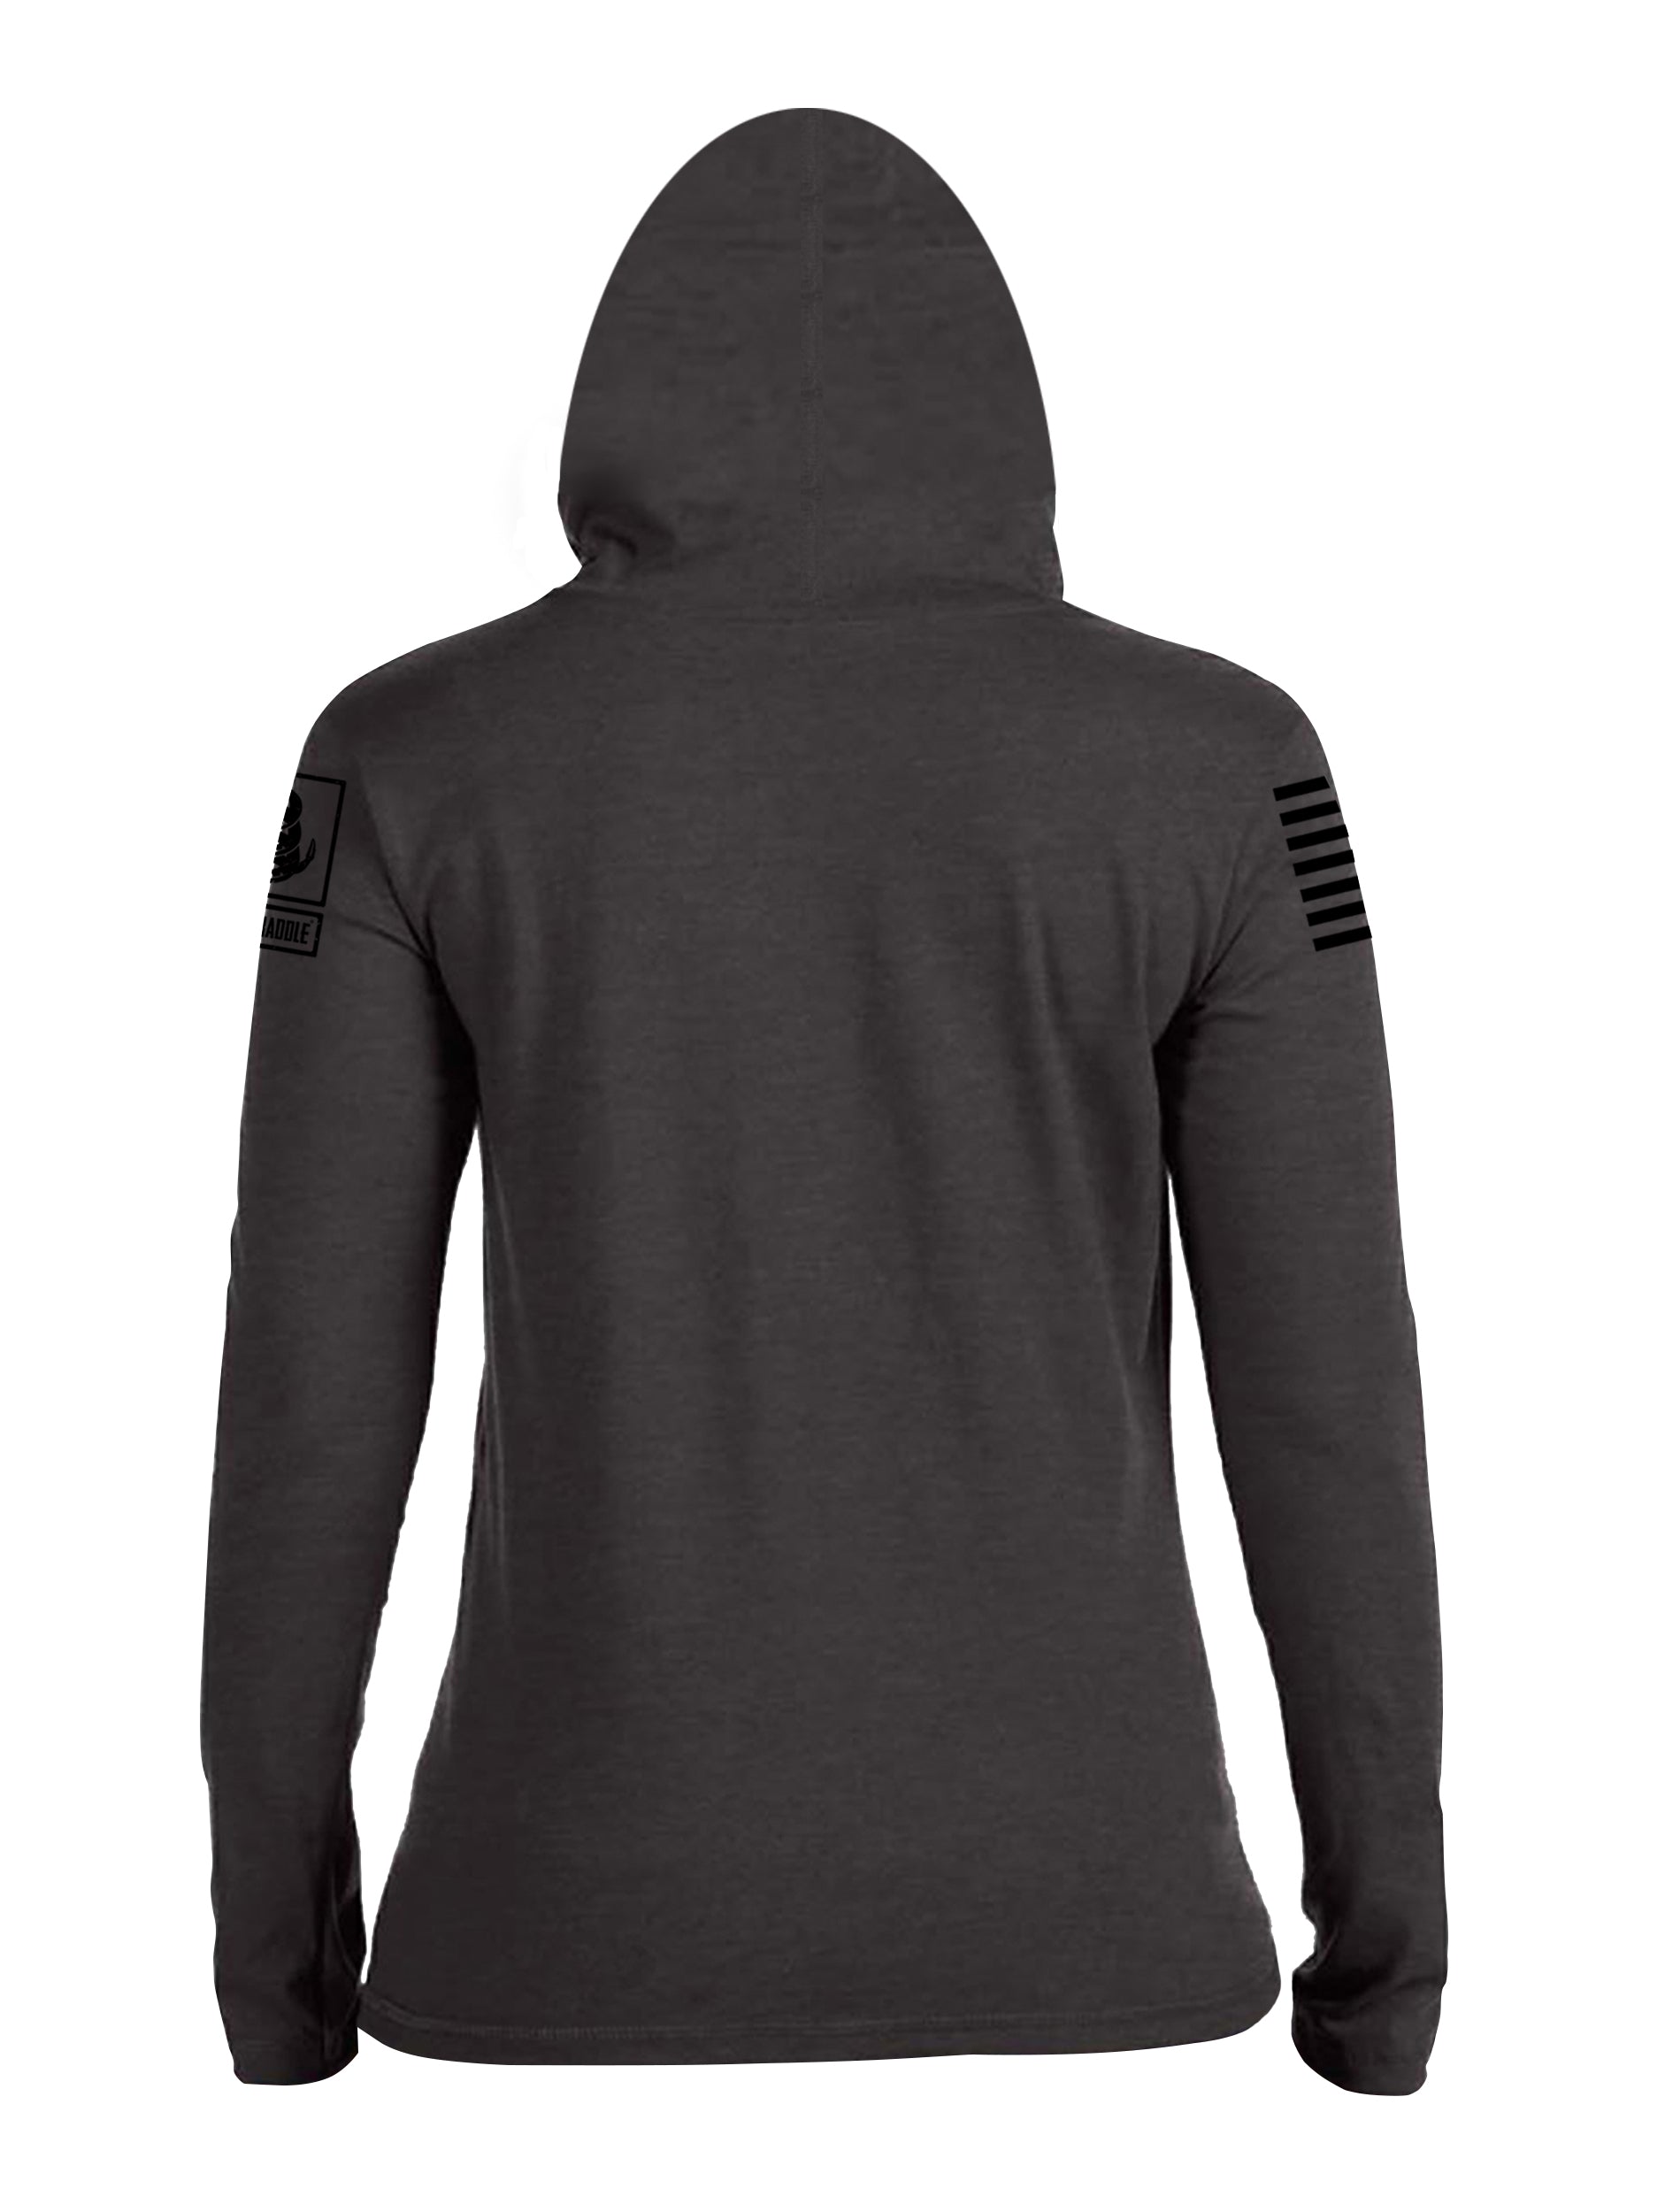 Battleraddle Ammo Stop Power To The Americans Womens Cotton Thin Lightweight Hoodie